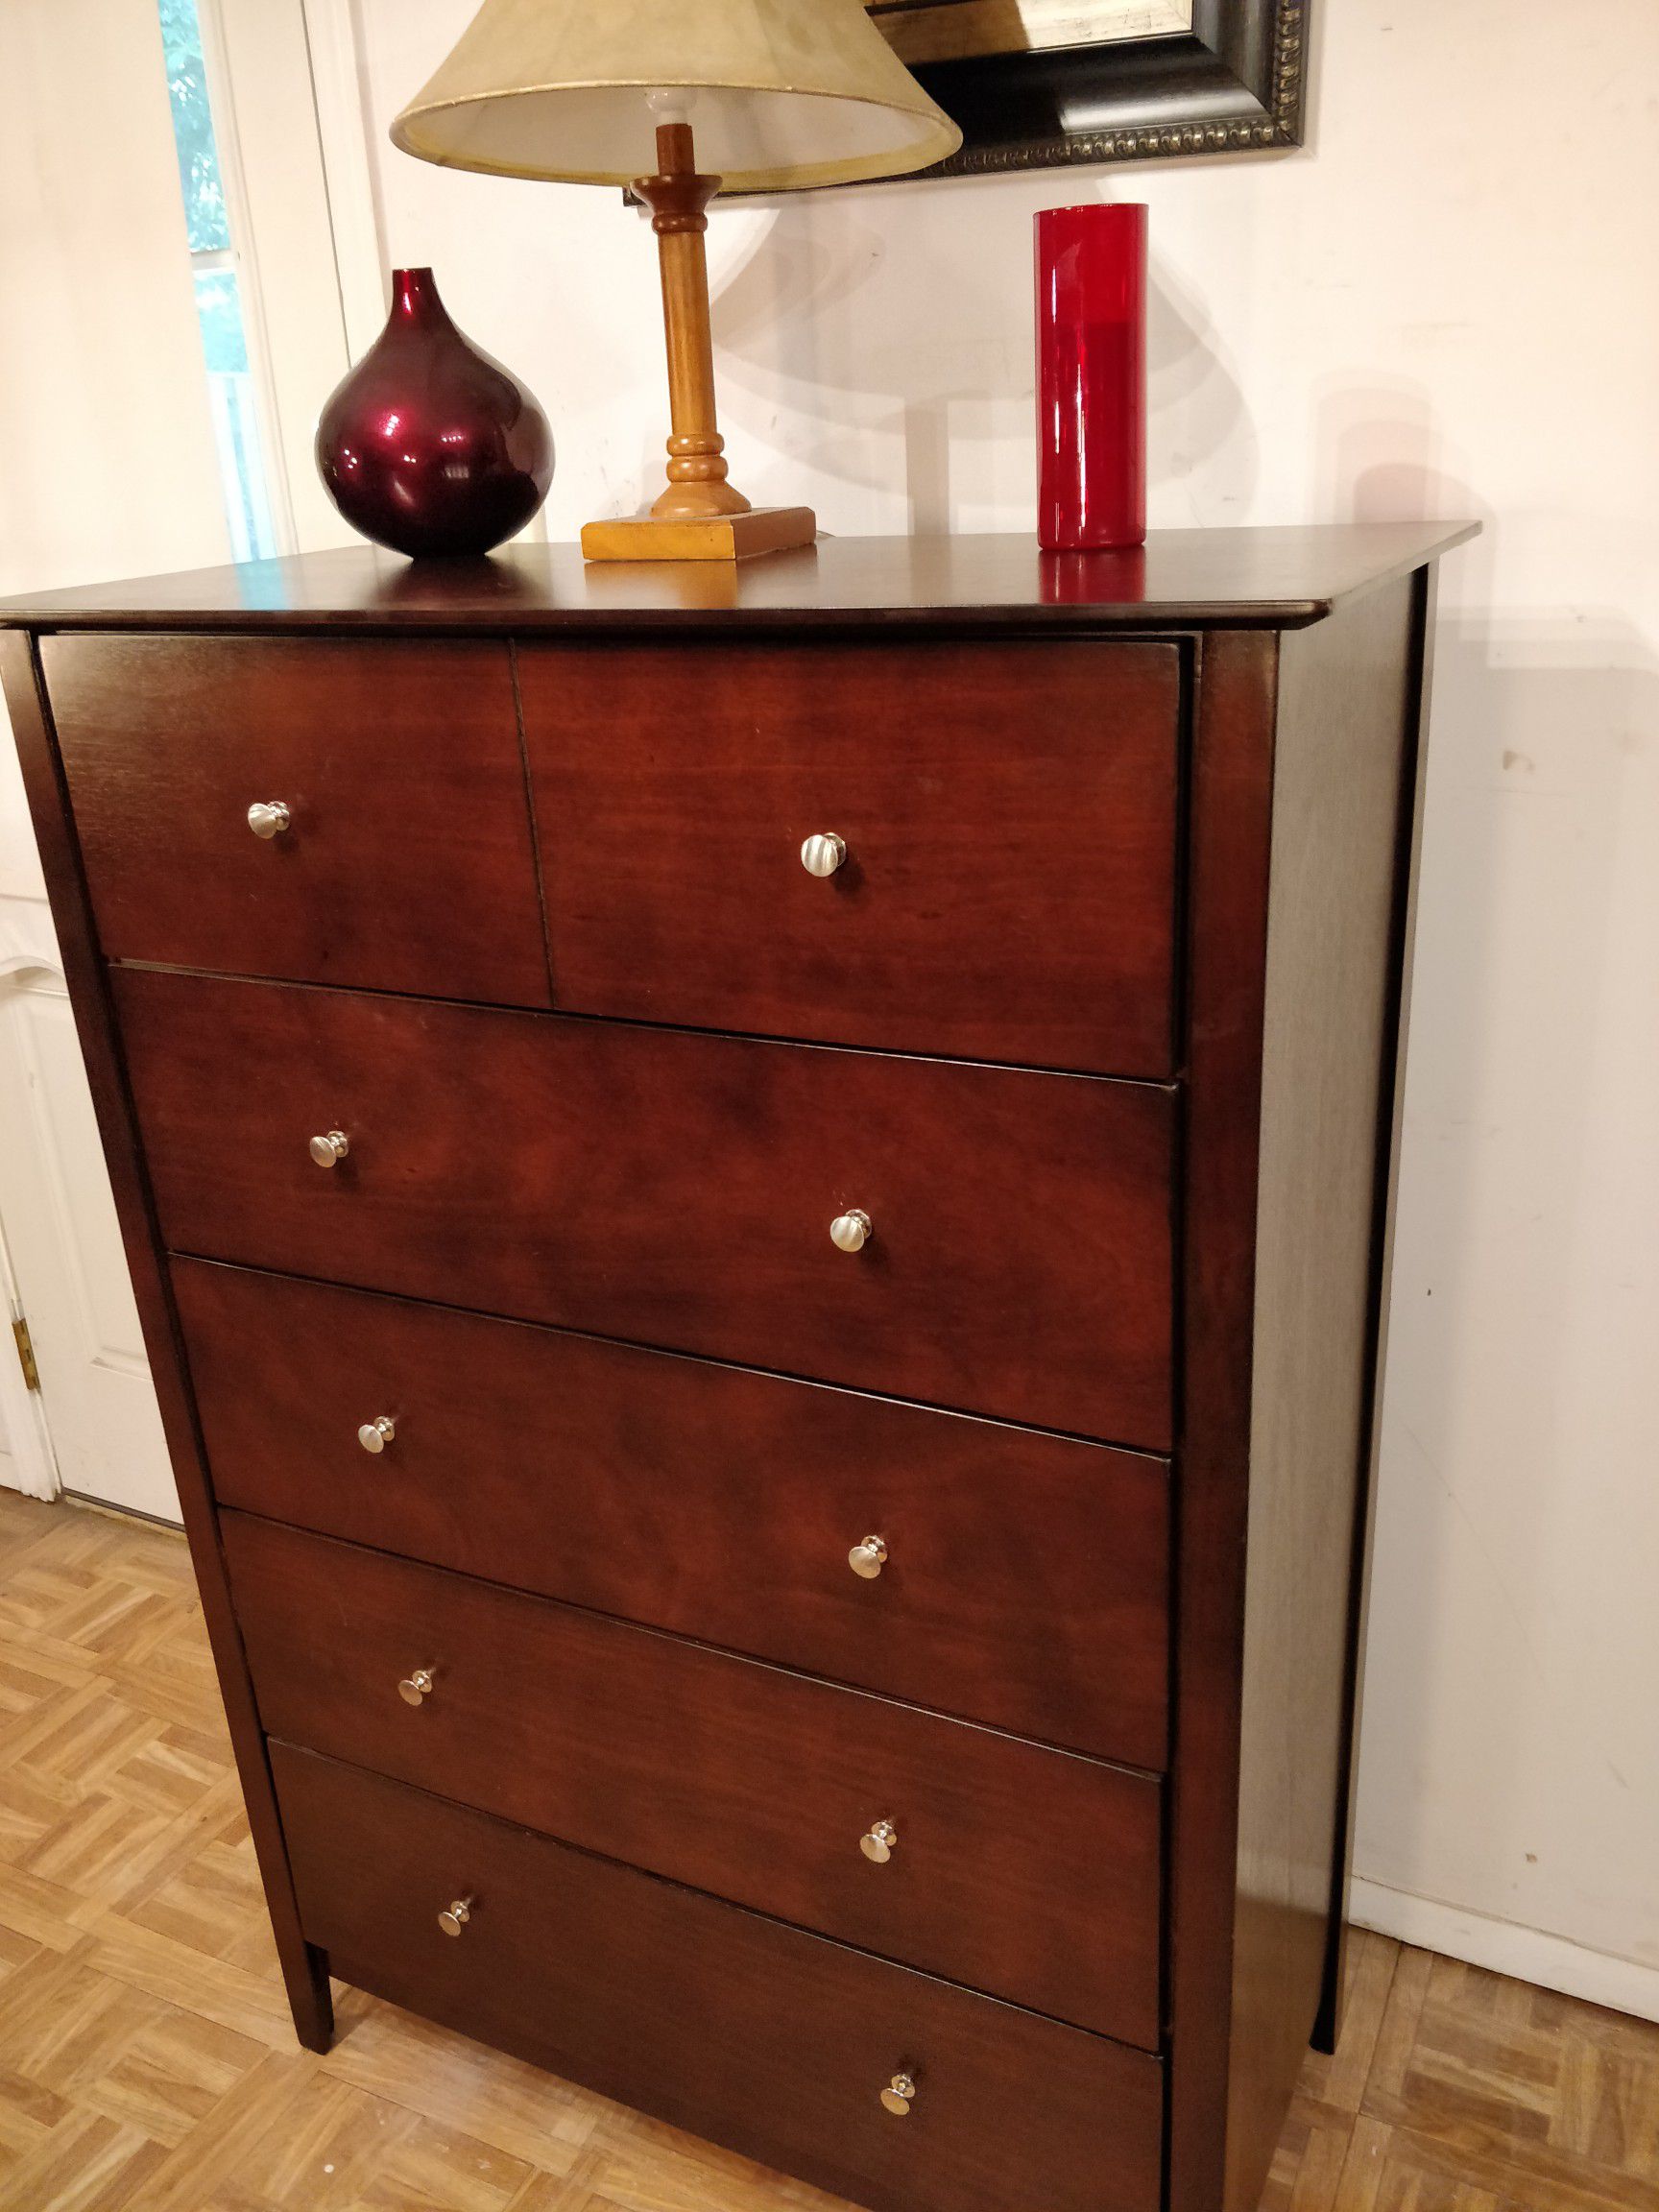 Like new big modern chest dresser with big drawers in very good condition, all drawers sliding smoothly. L37"*W17.5"*H53"